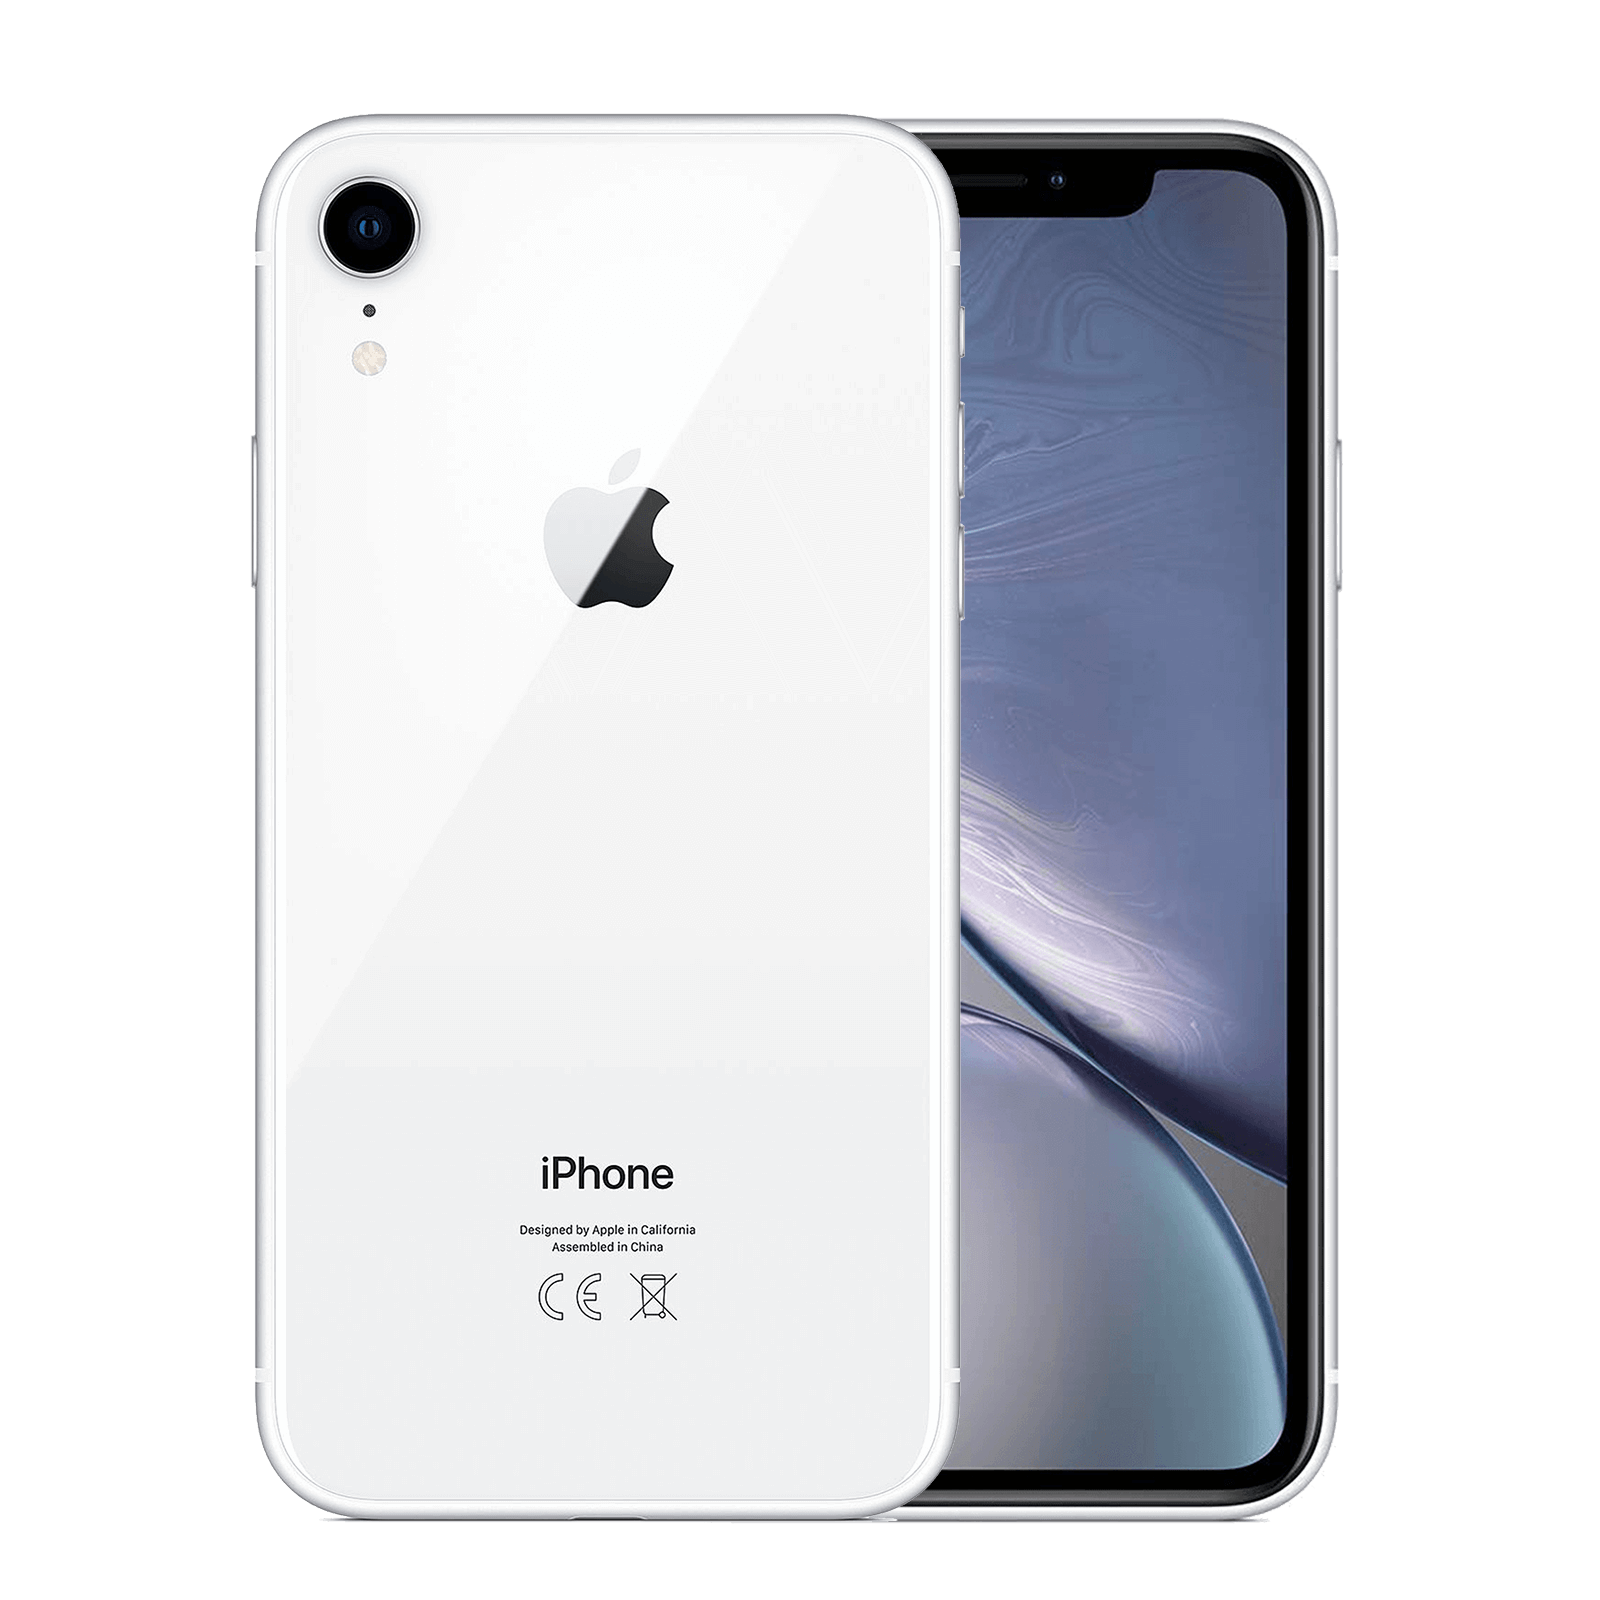 Apple iPhone XR 64GB White Good - AT&T